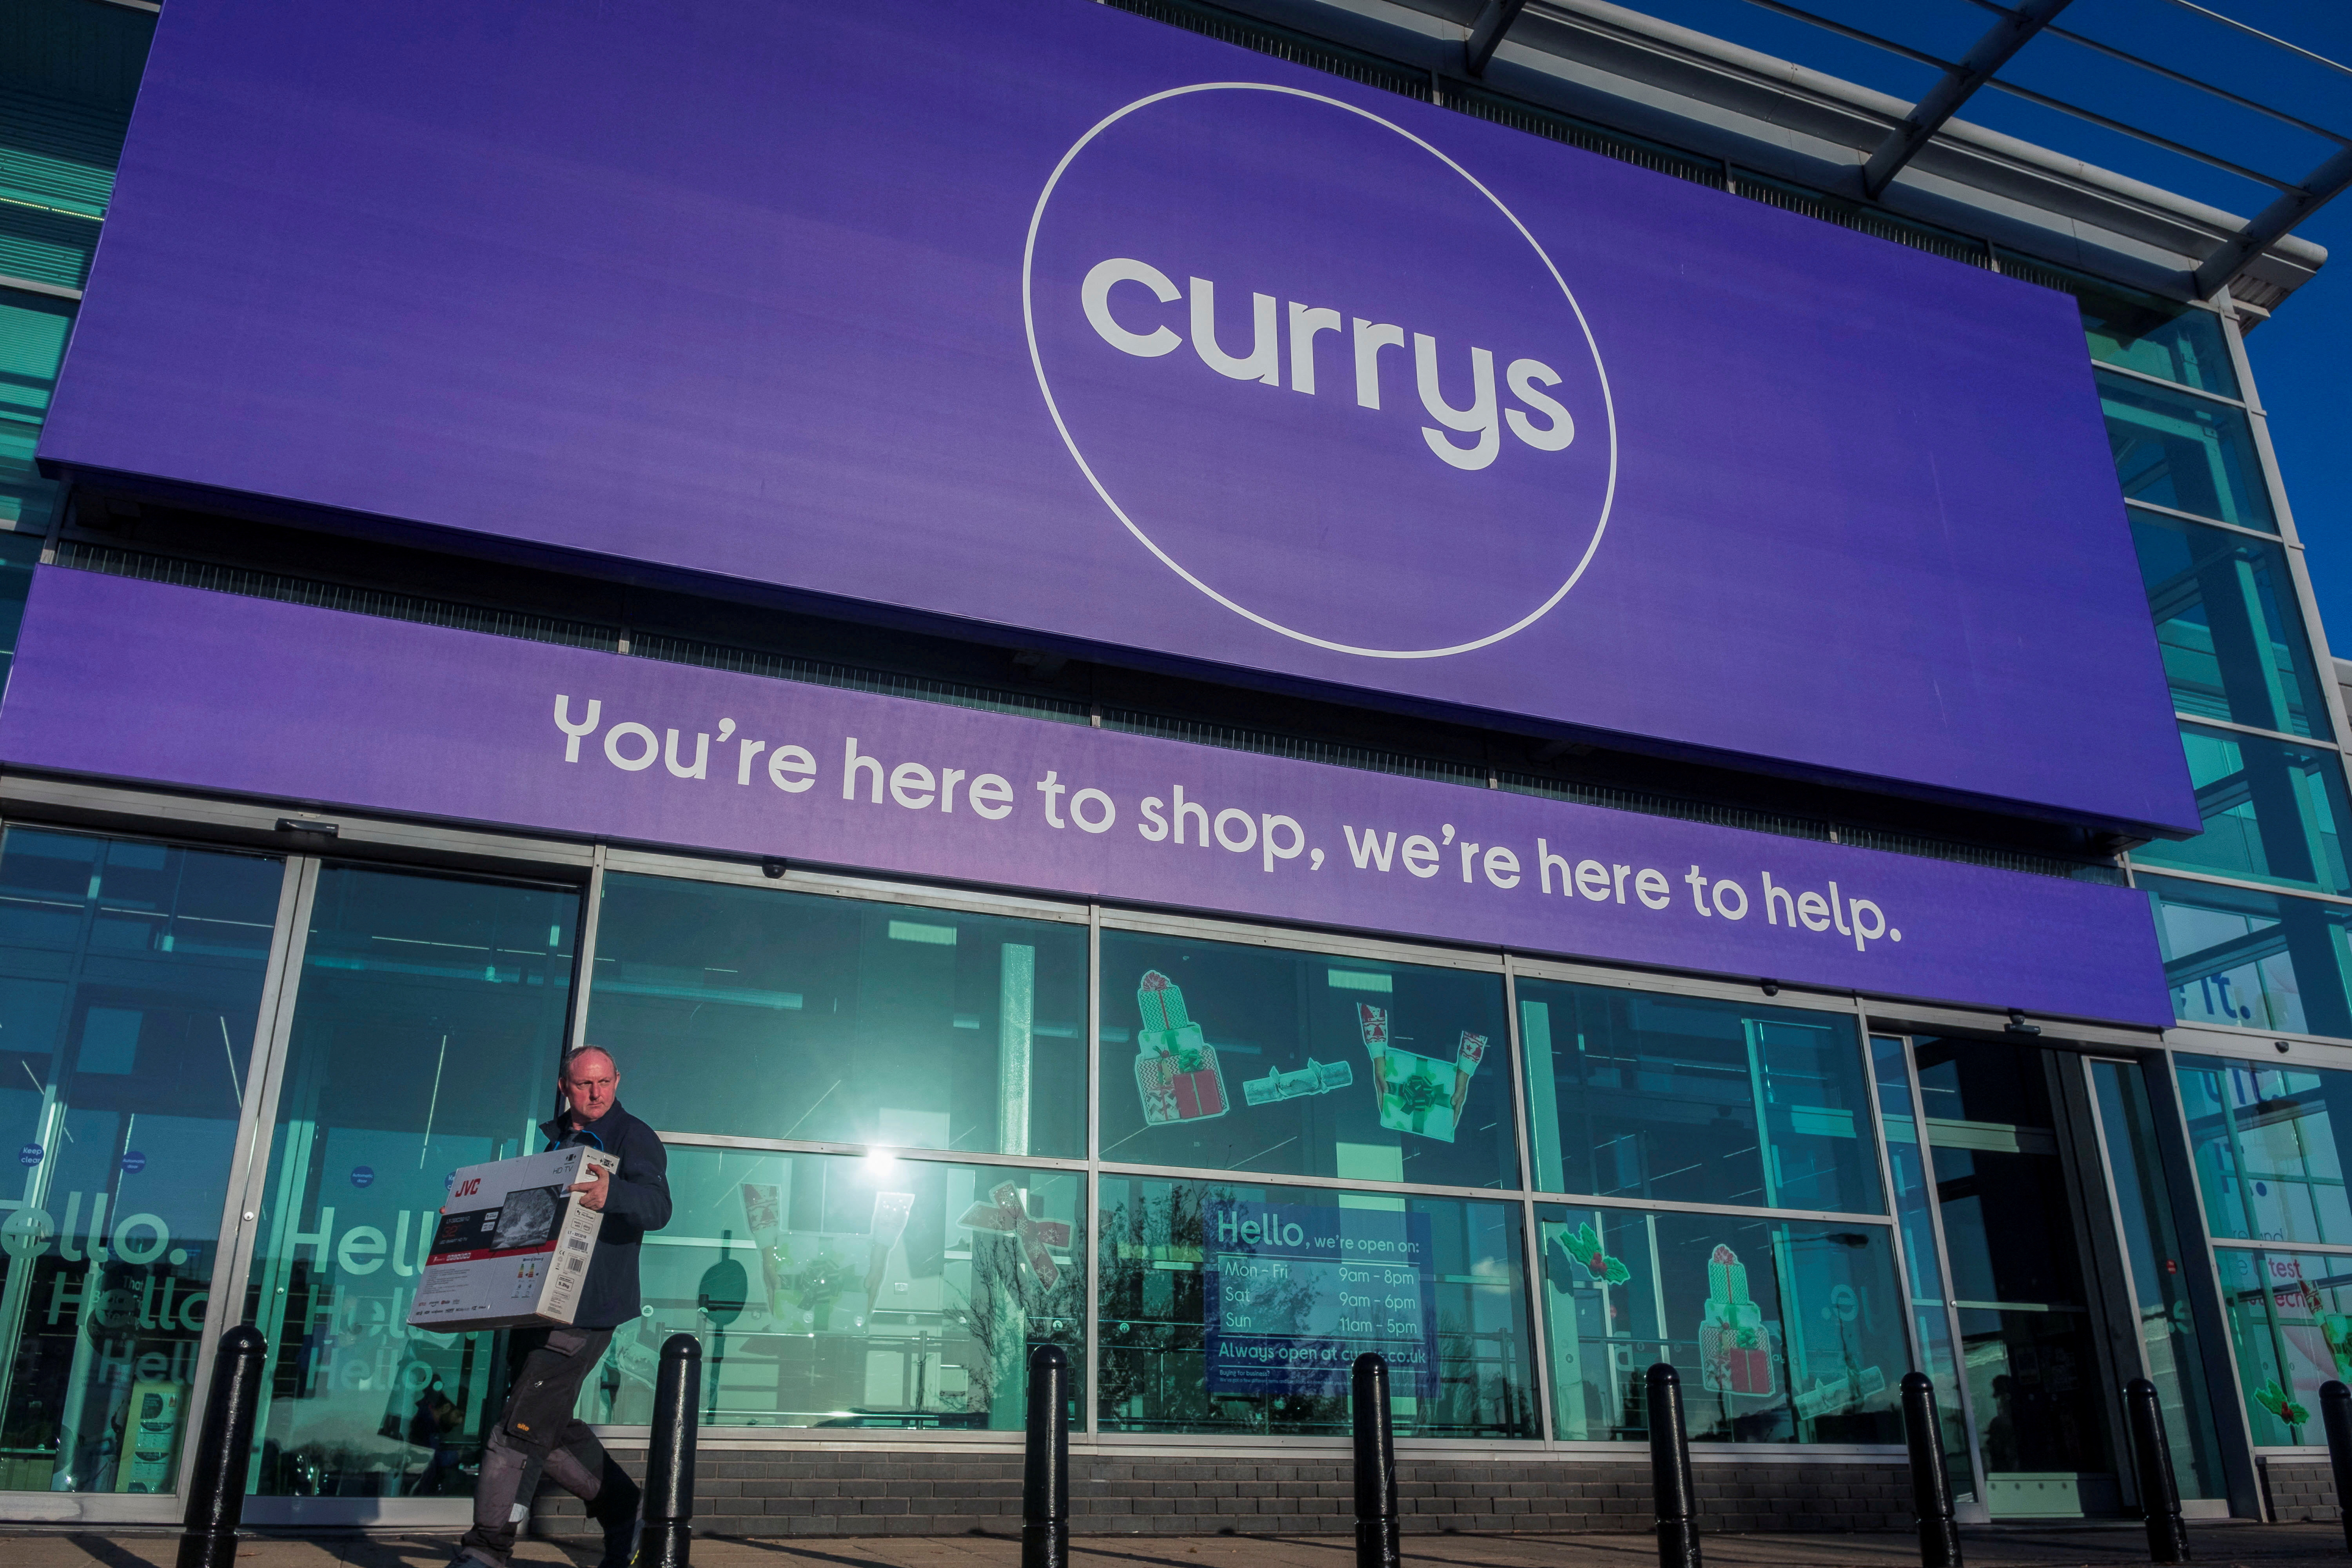 A person carries a television outside a Currys store in London